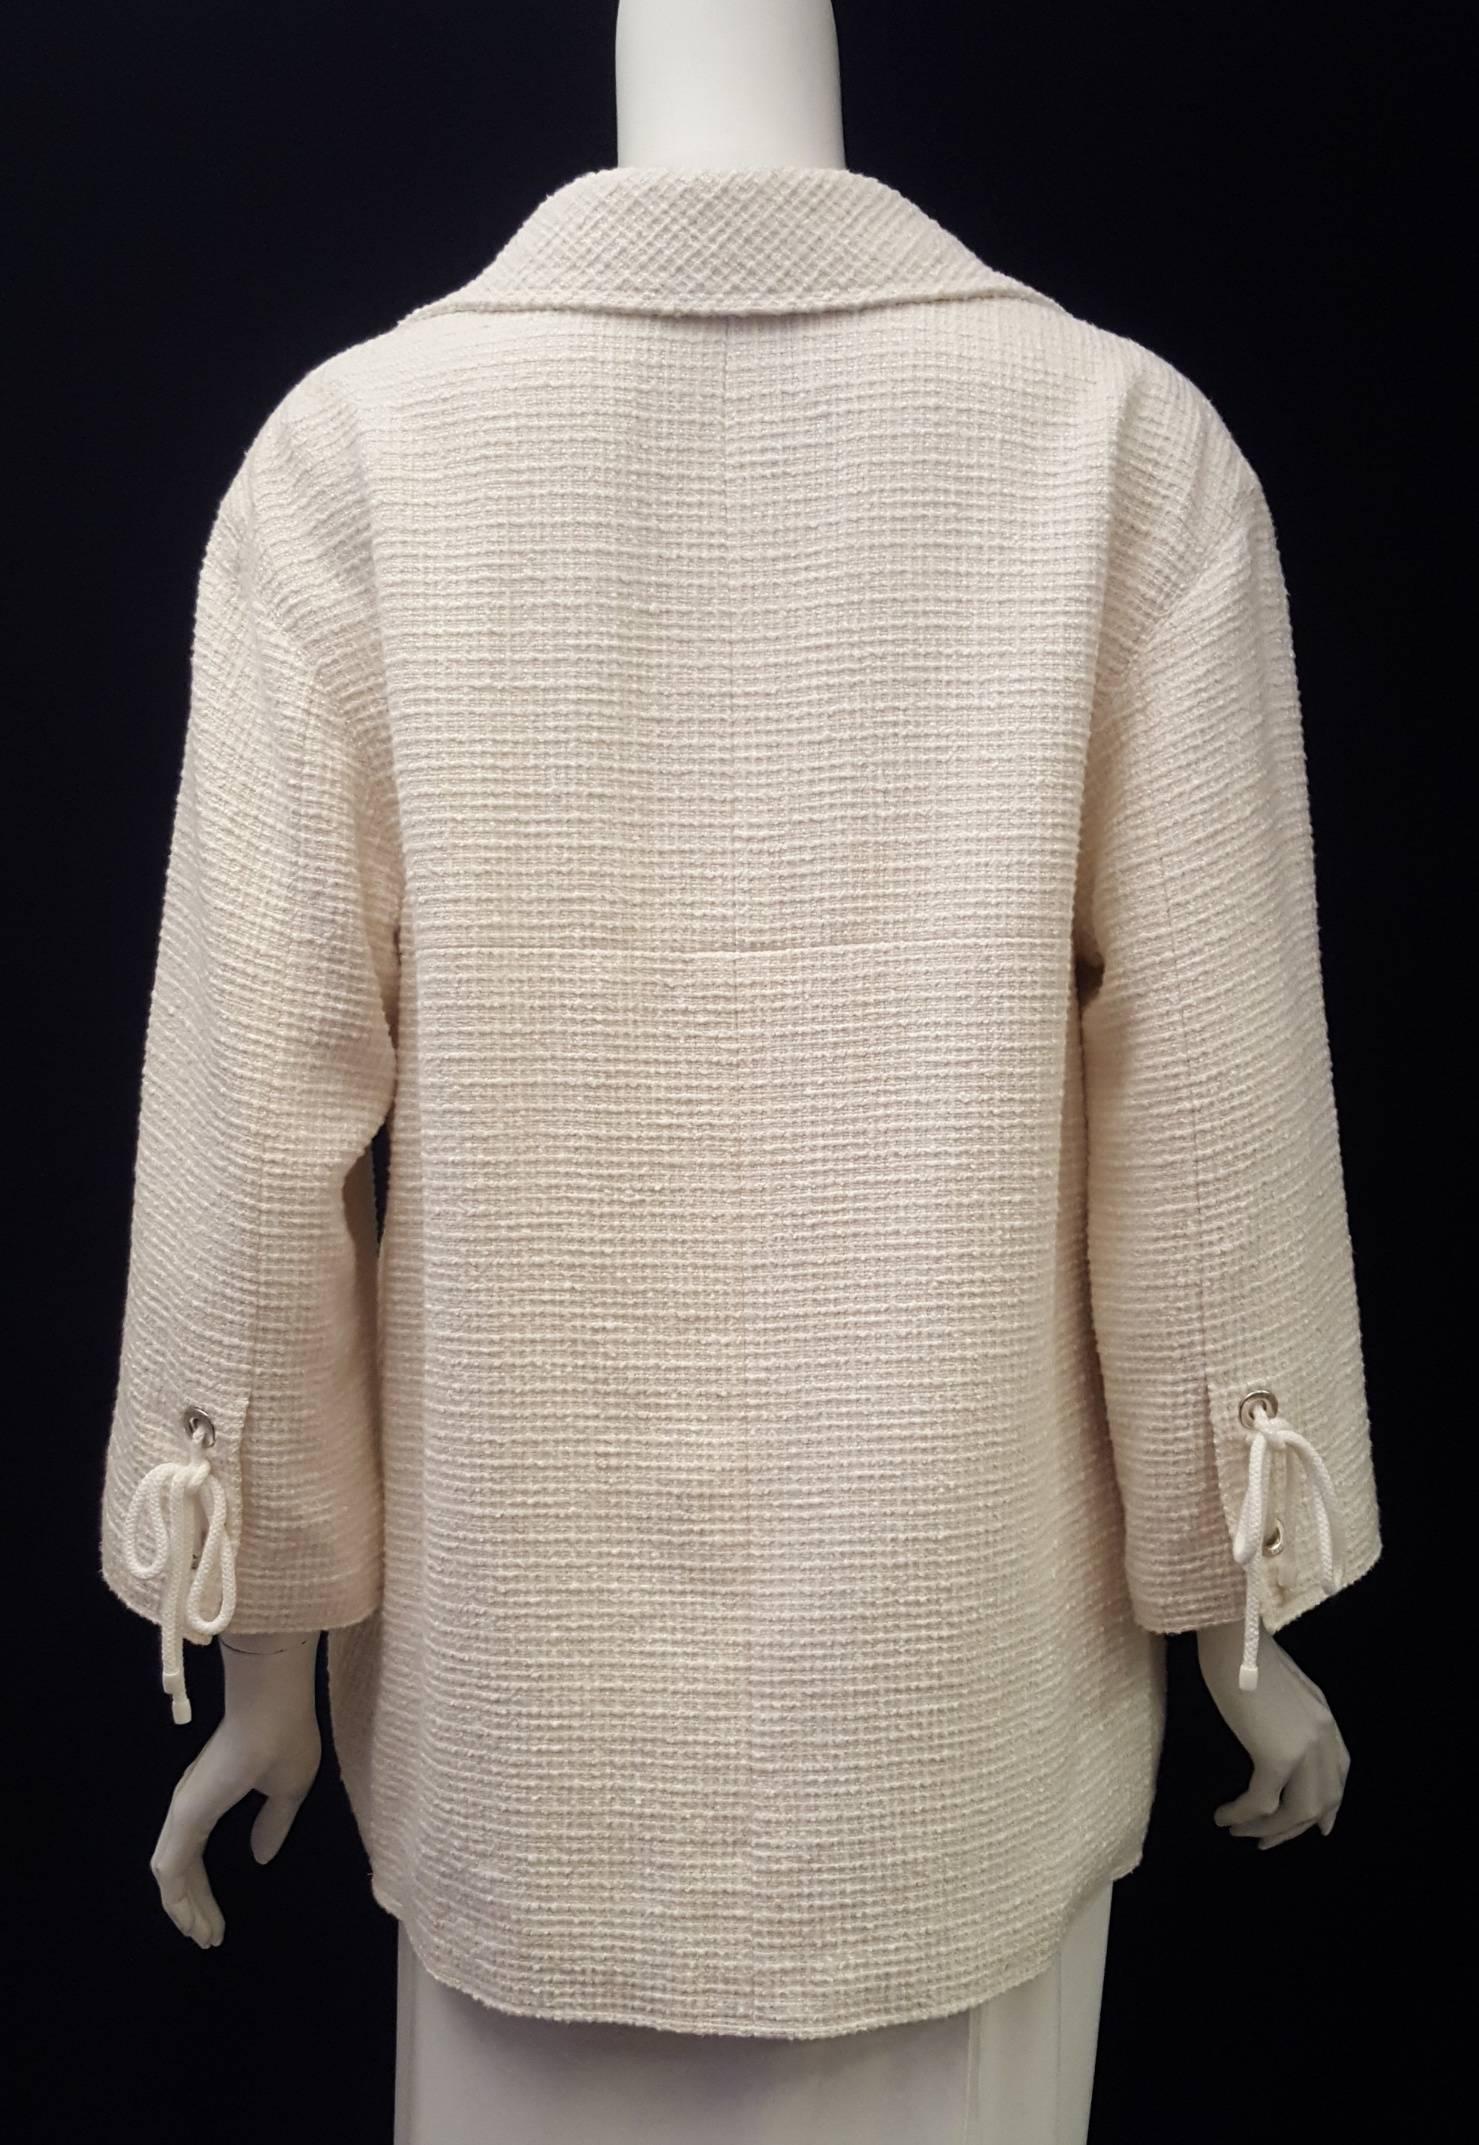 Women's Chanel Winter White 07 Cruise Collection Tweed Jacket